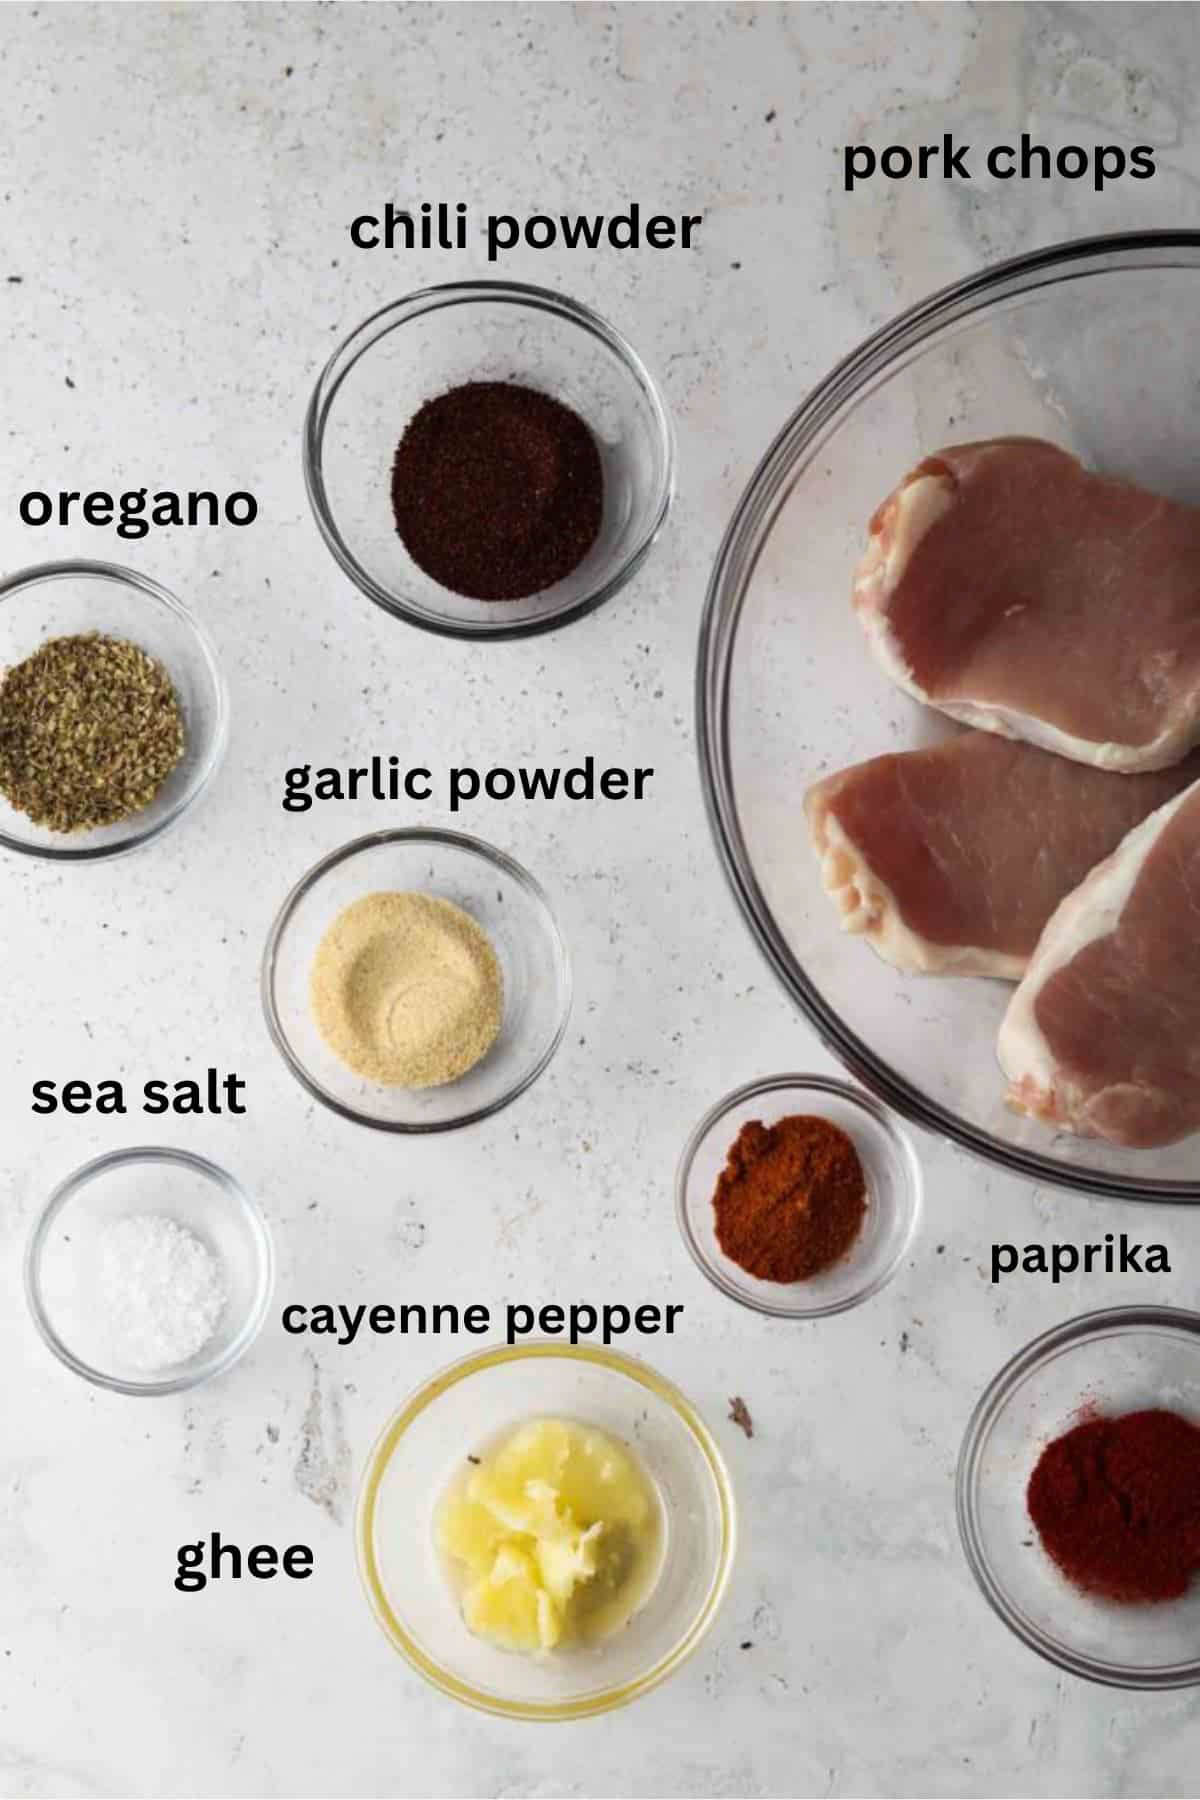 Blackened pork chop ingredients in small glass bowls. 